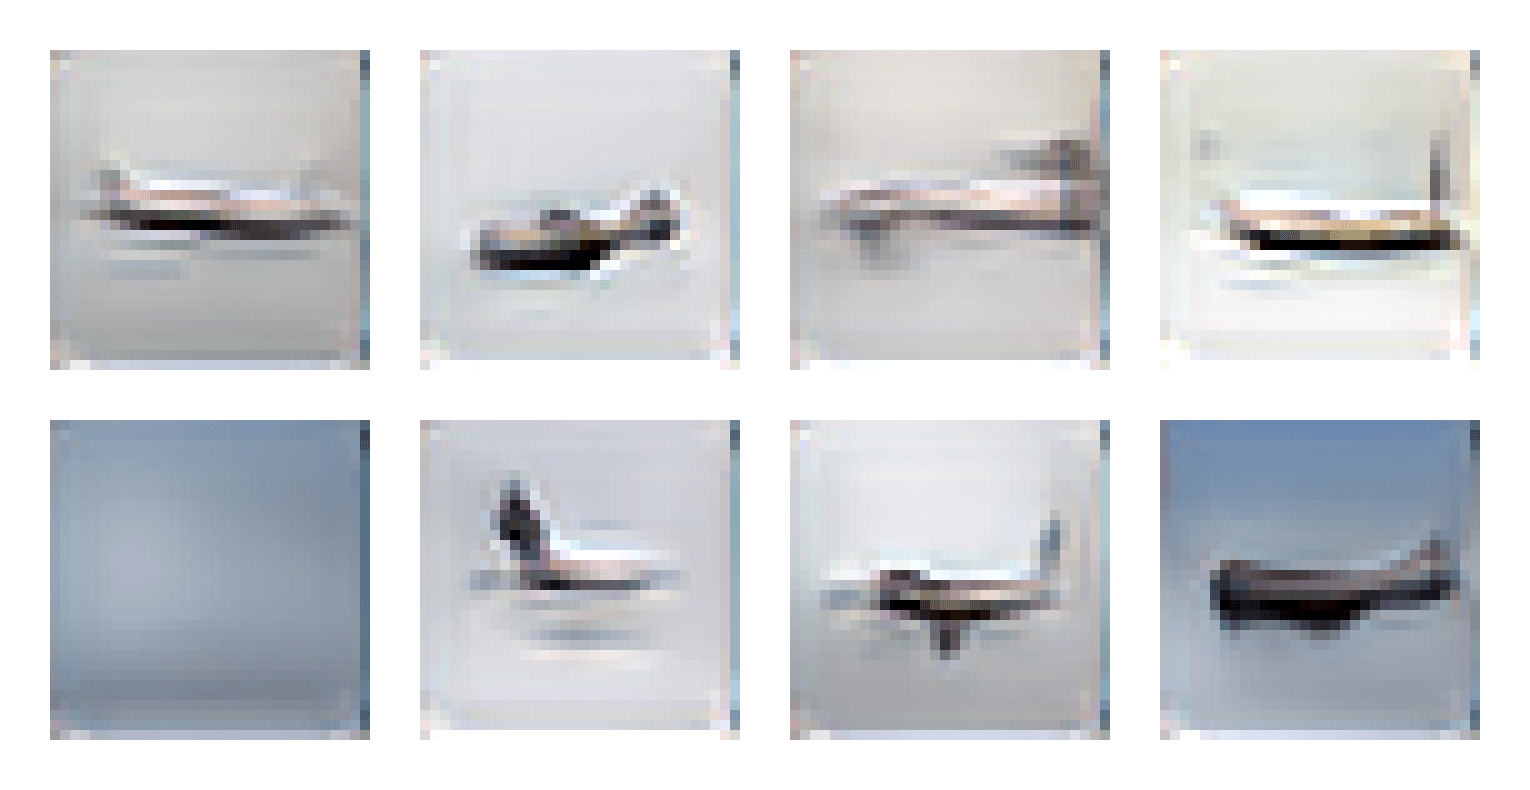 A set of 8 images created from the alignDRAW model based on the prompt “A very large commercial plane flying in rainy skies”. (Image credit: Fellowship)